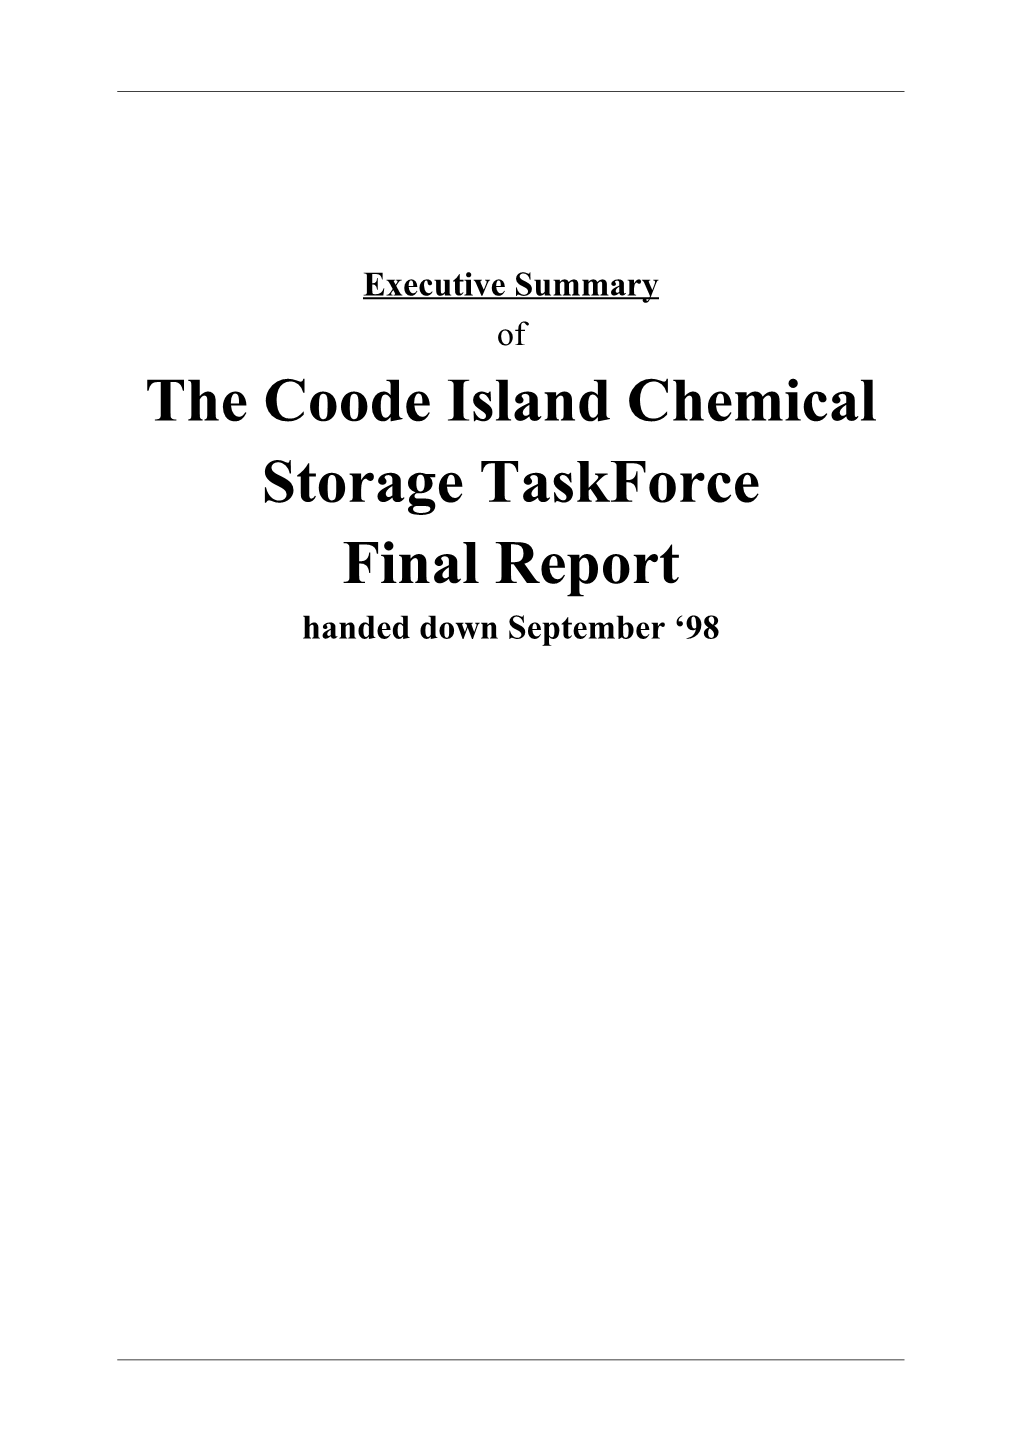 The Coode Island Chemical